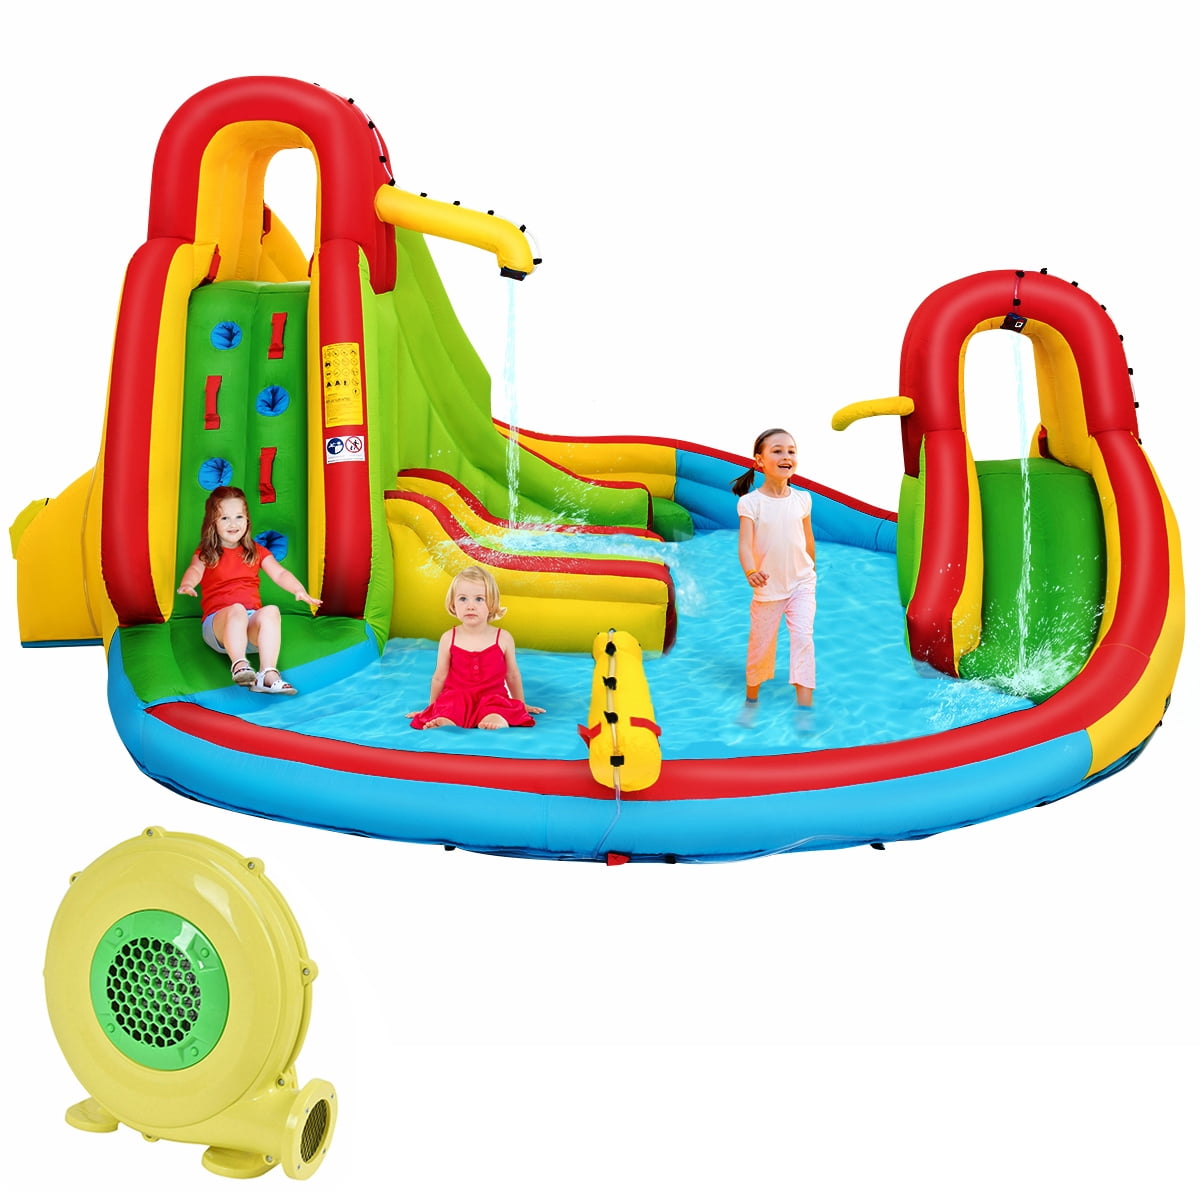 Inflatable Water Slide Everything Kool Jumper Splash Water Slide Inflatable Play Center Swimming Pool Wet Accessory Kids Fun Park Game Family,Outdoor Blow Up Water Park for Backyard